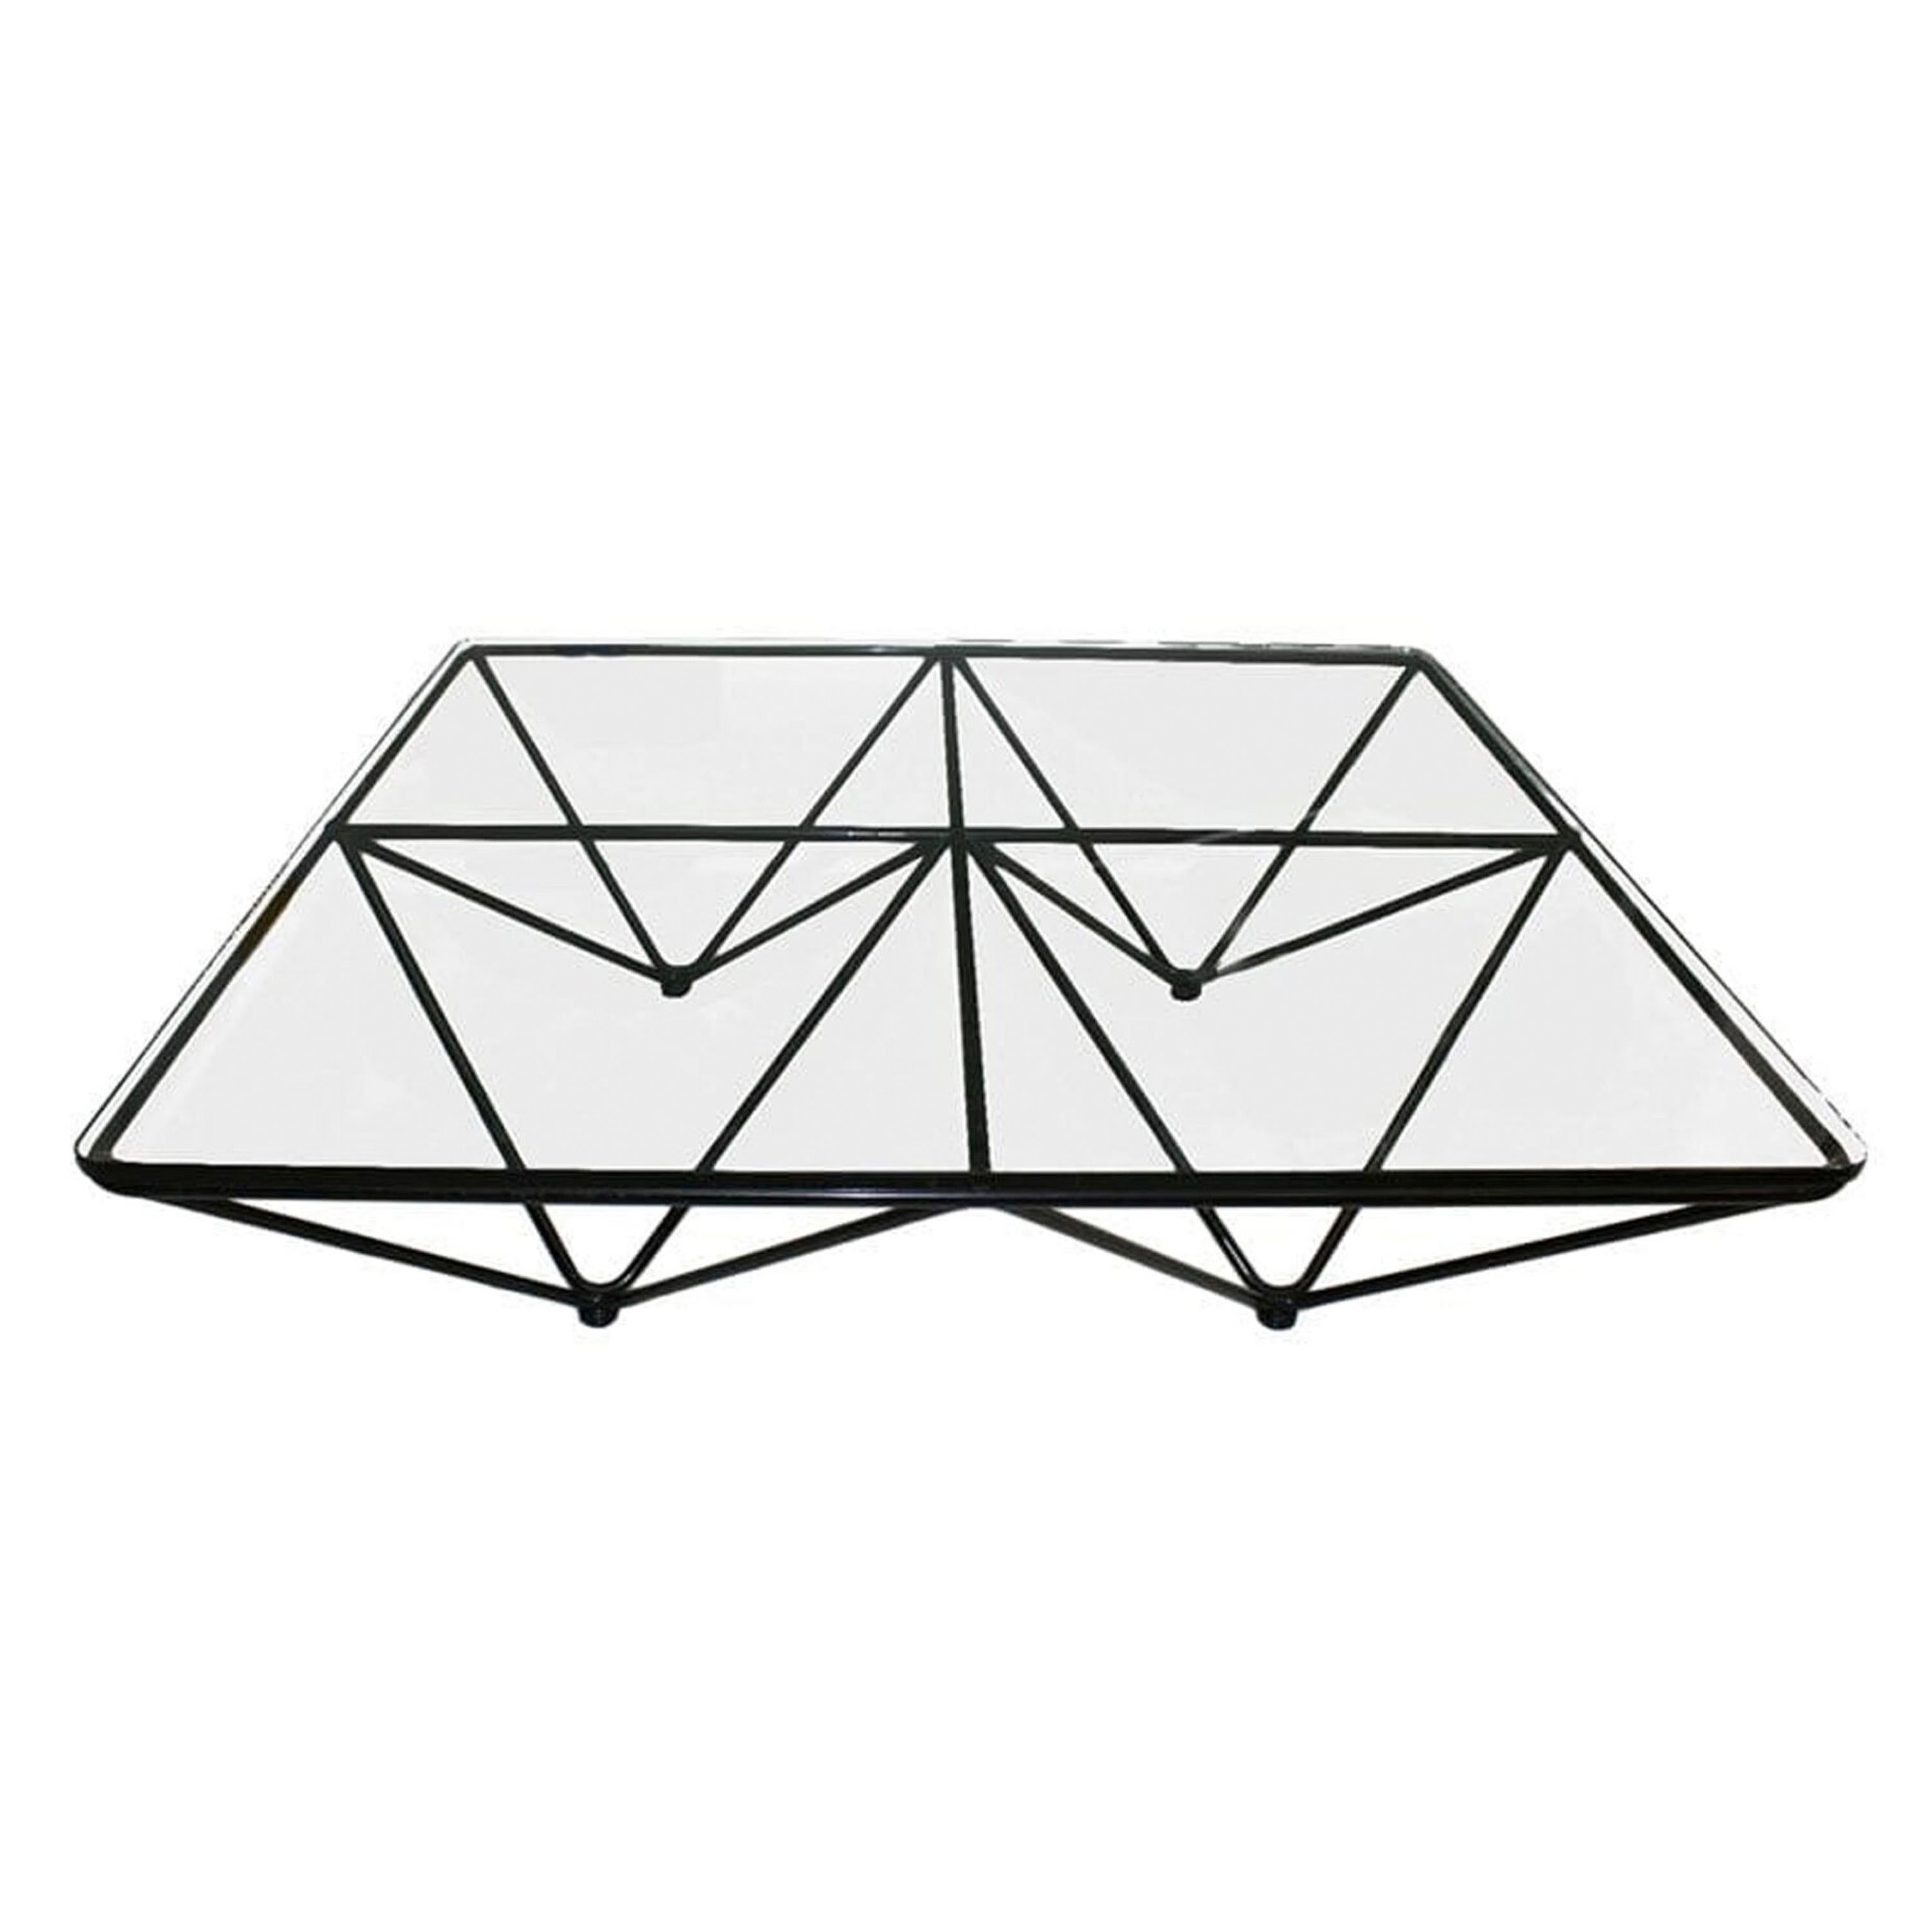 Rectangular coffee table by the famous Italian designer Paolo Piva from the 1970s edited by B&B Italia, Alanda model. It is composed of a glass top and a black lacquered tubular geometric metal base. 

Paolo Piva (Adria, Italy, 1950- 2017) was an